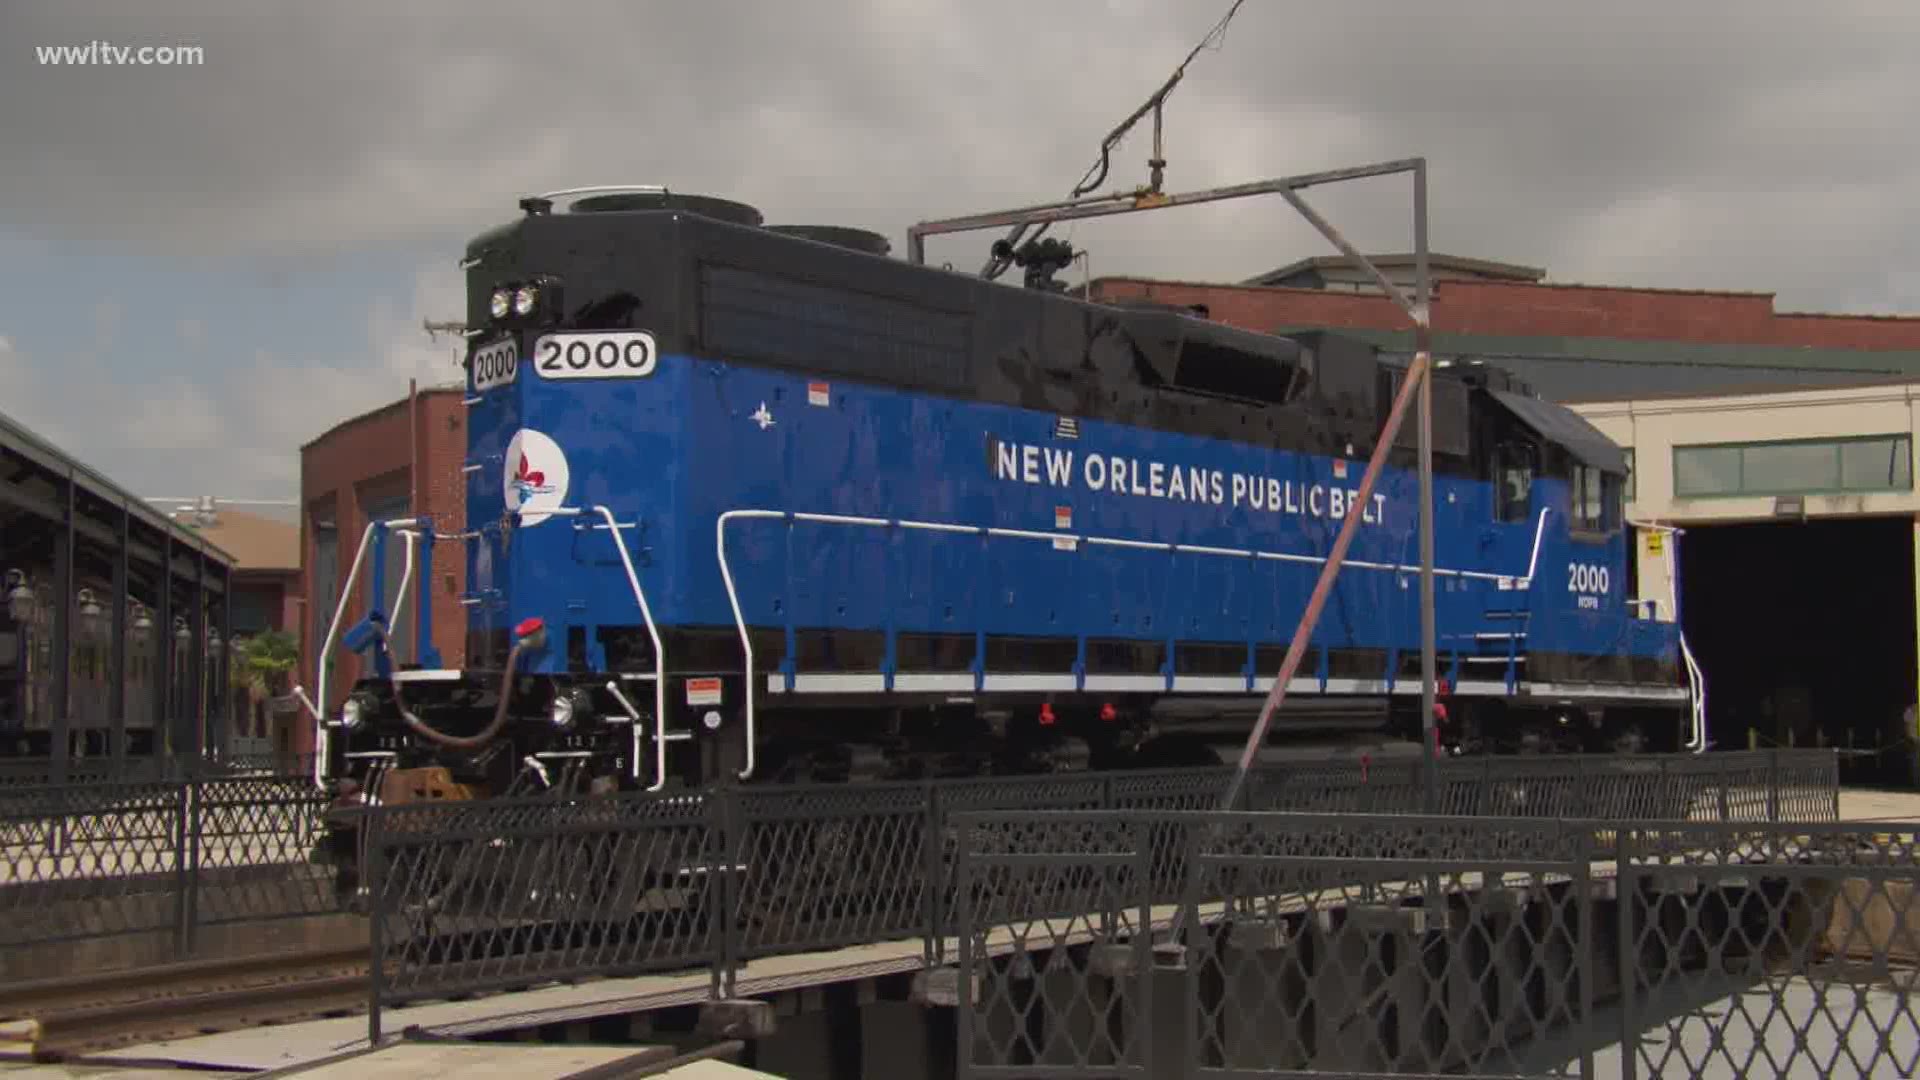 Dave Nussbaum explains how the New Orleans Public Belt Railroad is debuting 8 new lower-emission locomotives, in an effort to be more sustainable and eco-friendly.